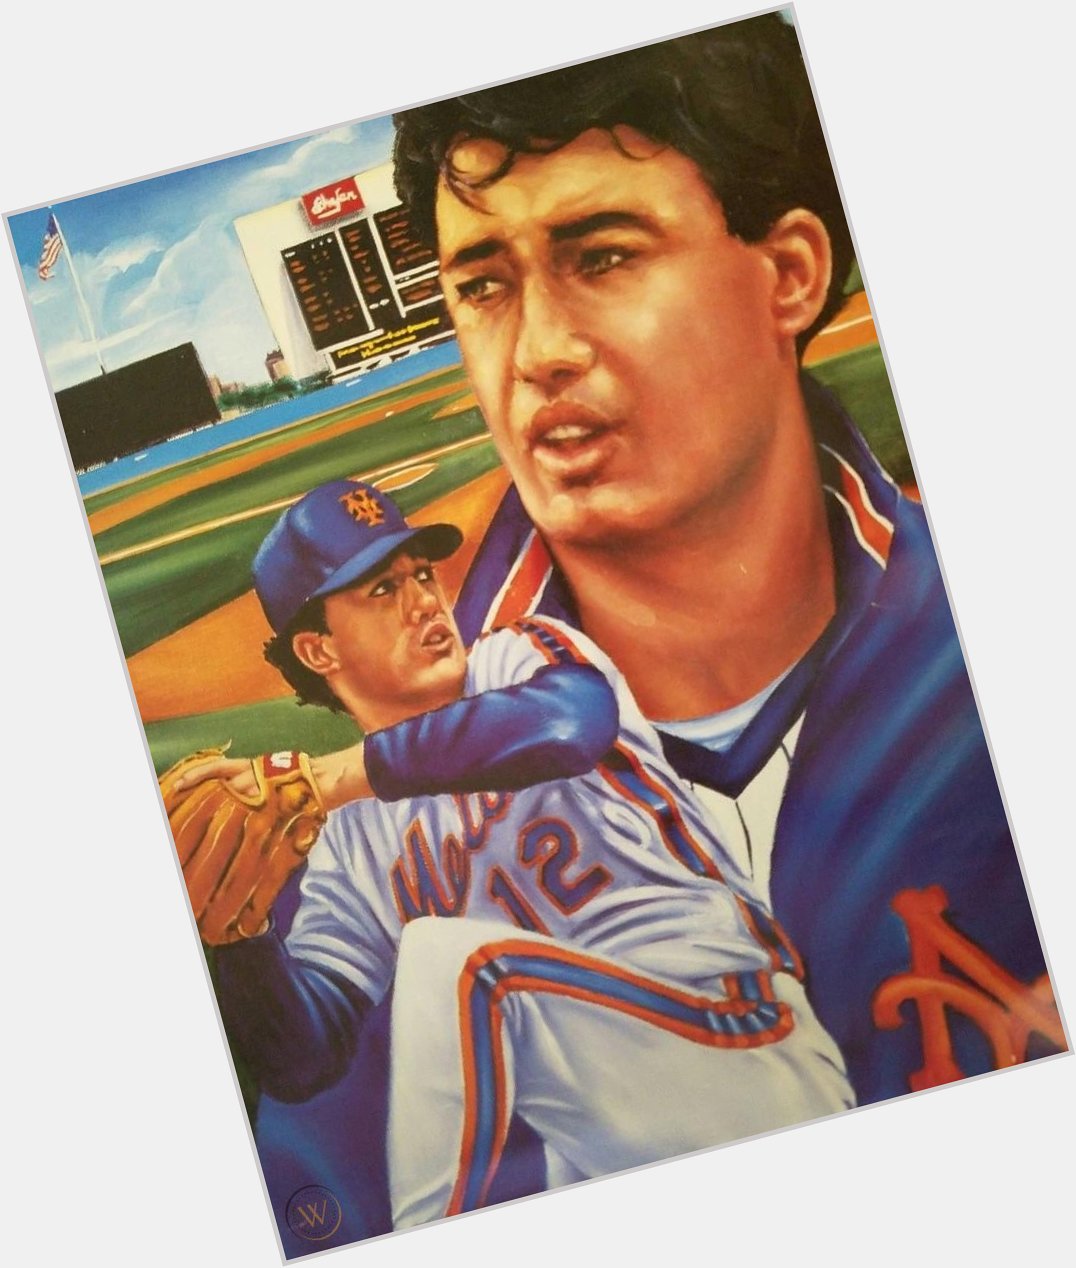 Happy Birthday to Ron Darling! 